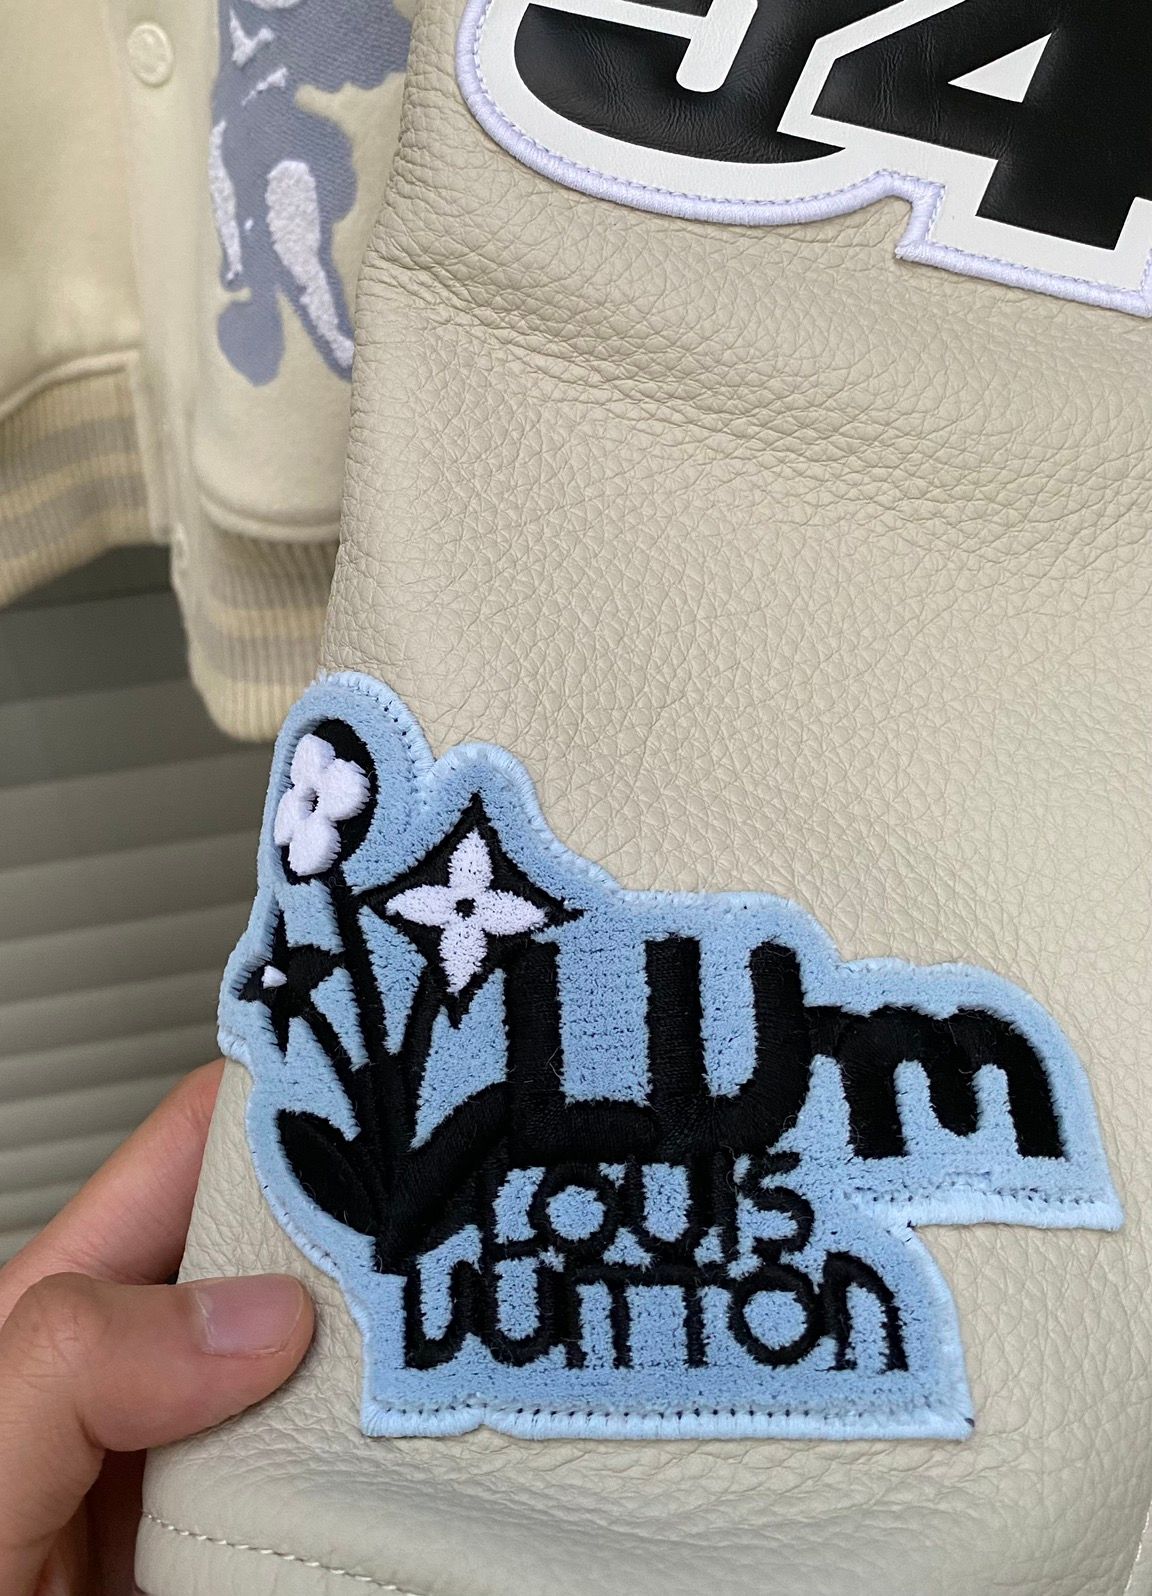 Louis Vuitton FW22 Cream Patched Bunny Varsity Jacket